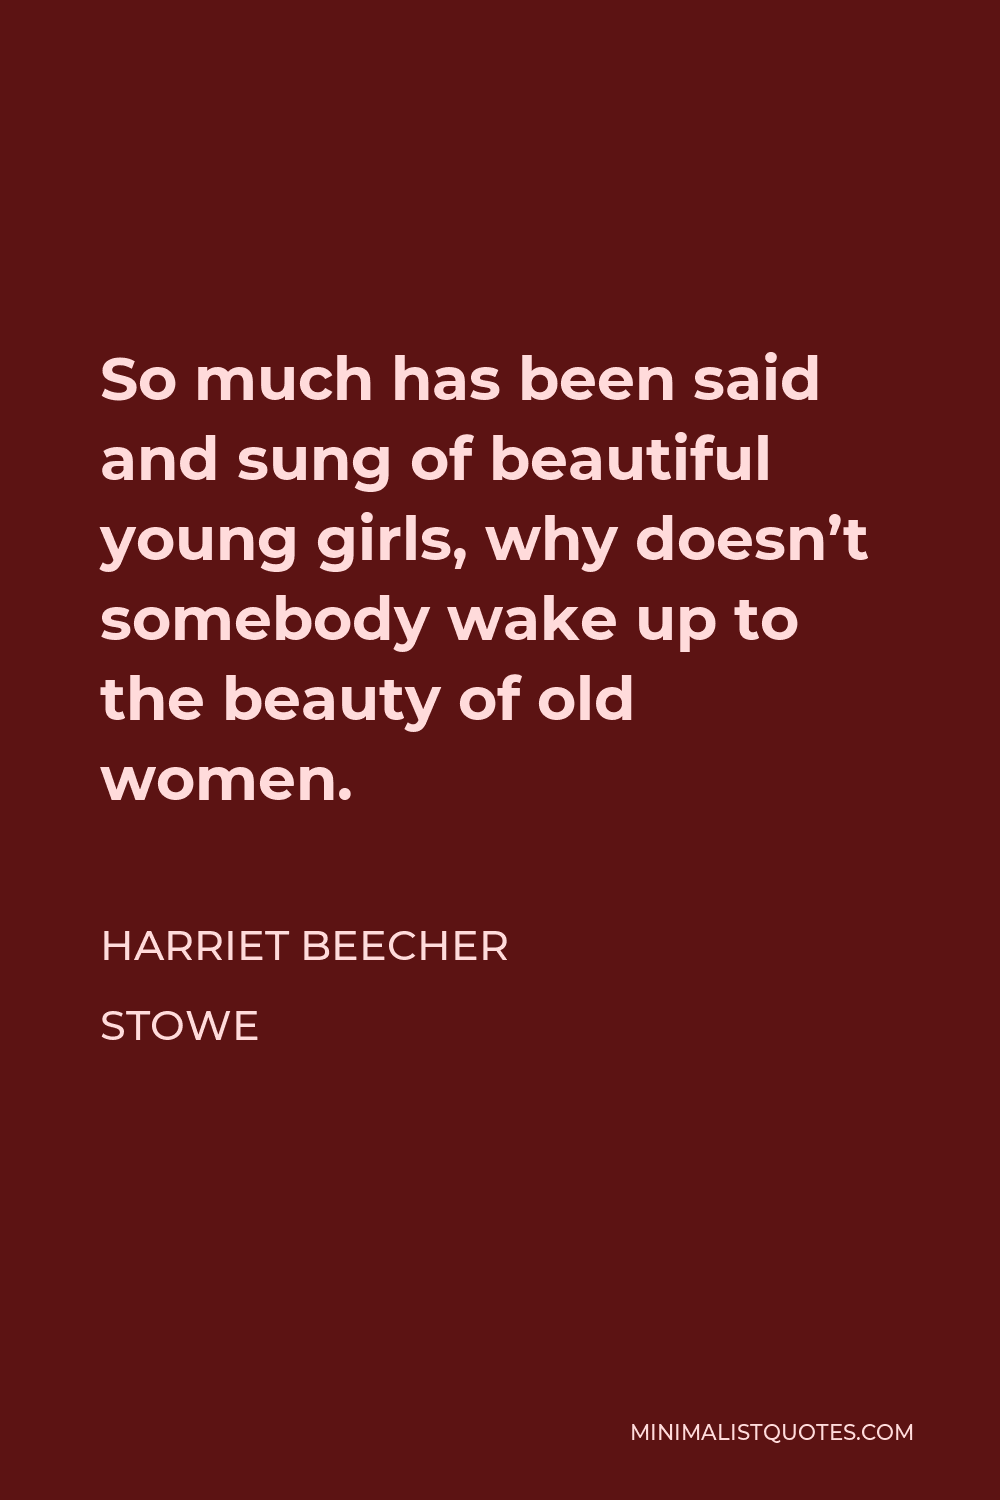 Harriet Beecher Stowe Quote - So much has been said and sung of beautiful young girls, why doesn’t somebody wake up to the beauty of old women.